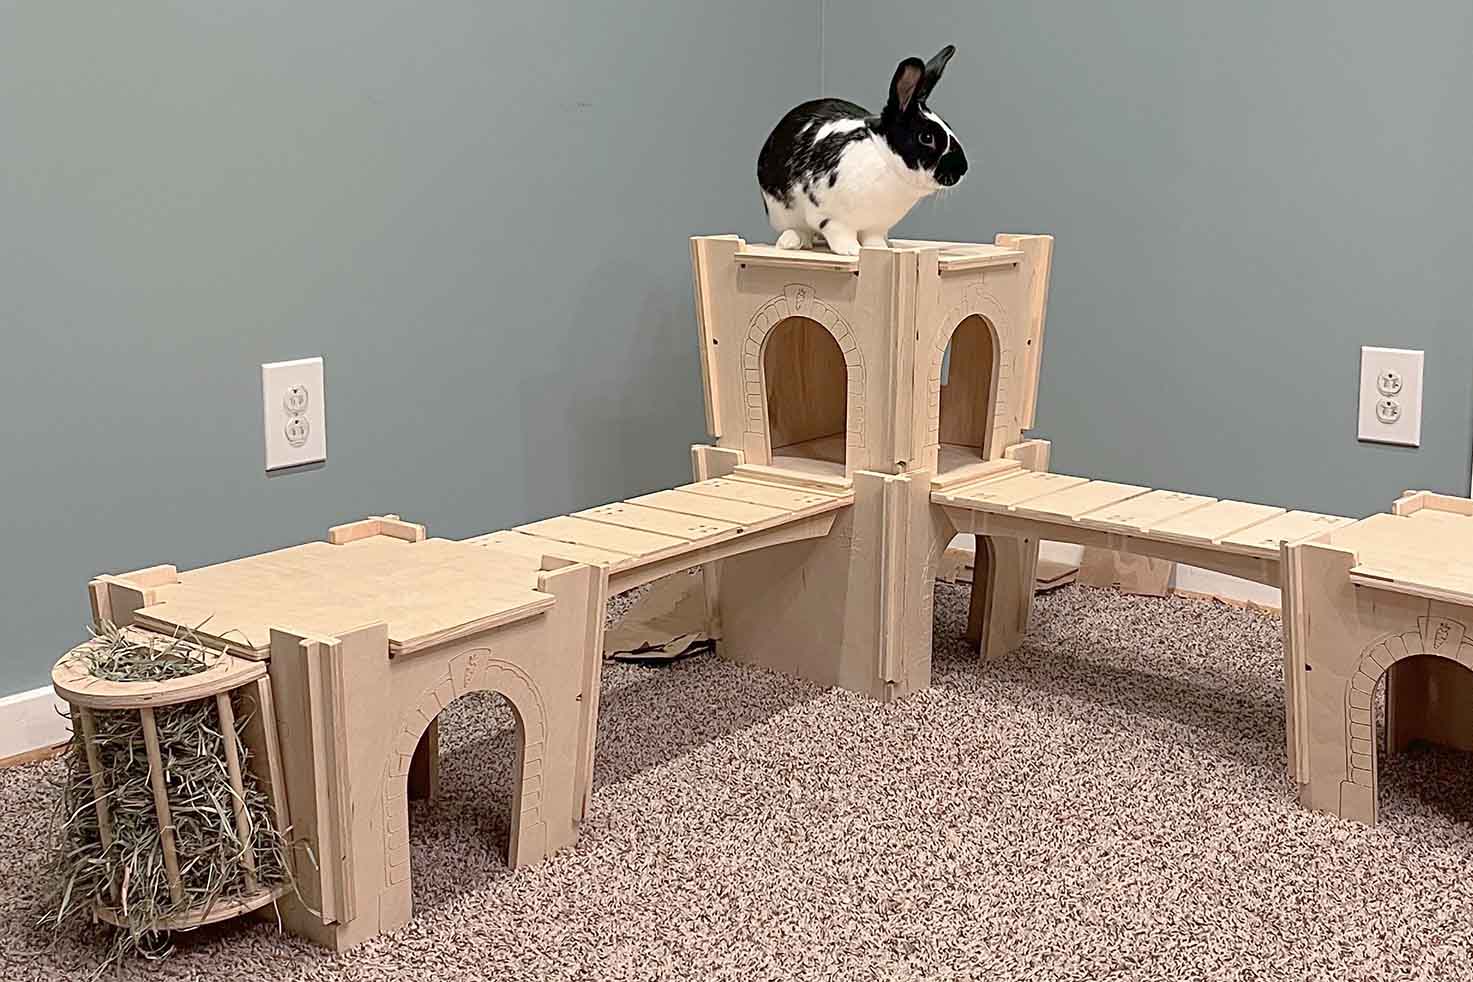 Oreo the bunny rabbit is king of his castle